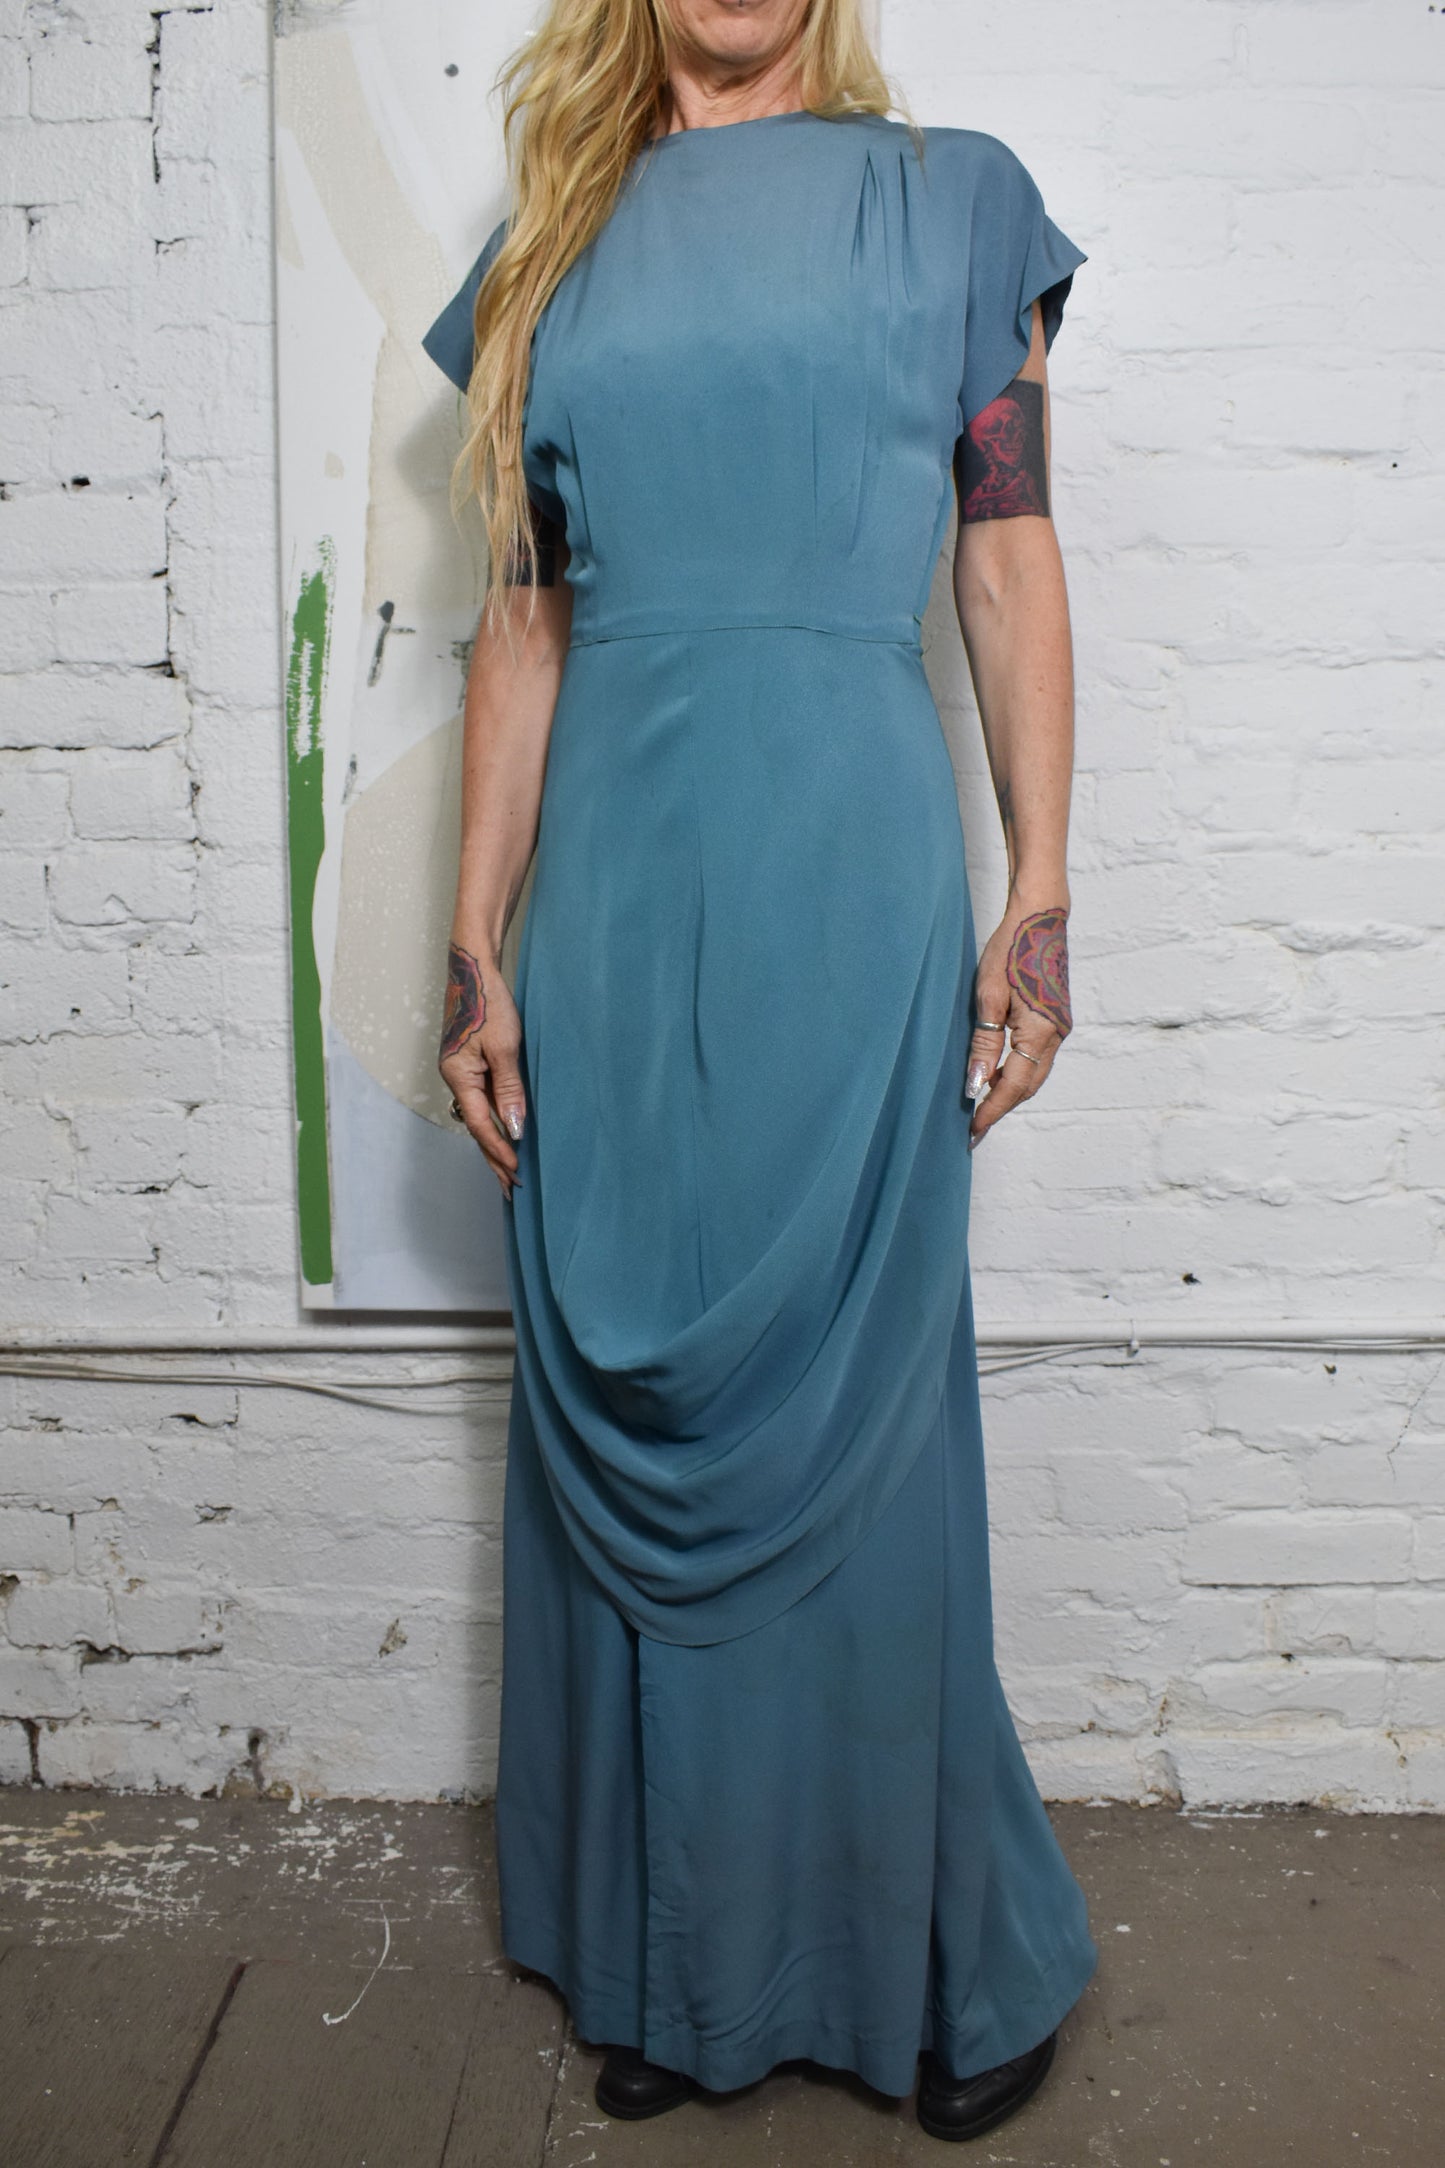 Vintage 1940's "Du Barry" Teal Rayon Gown